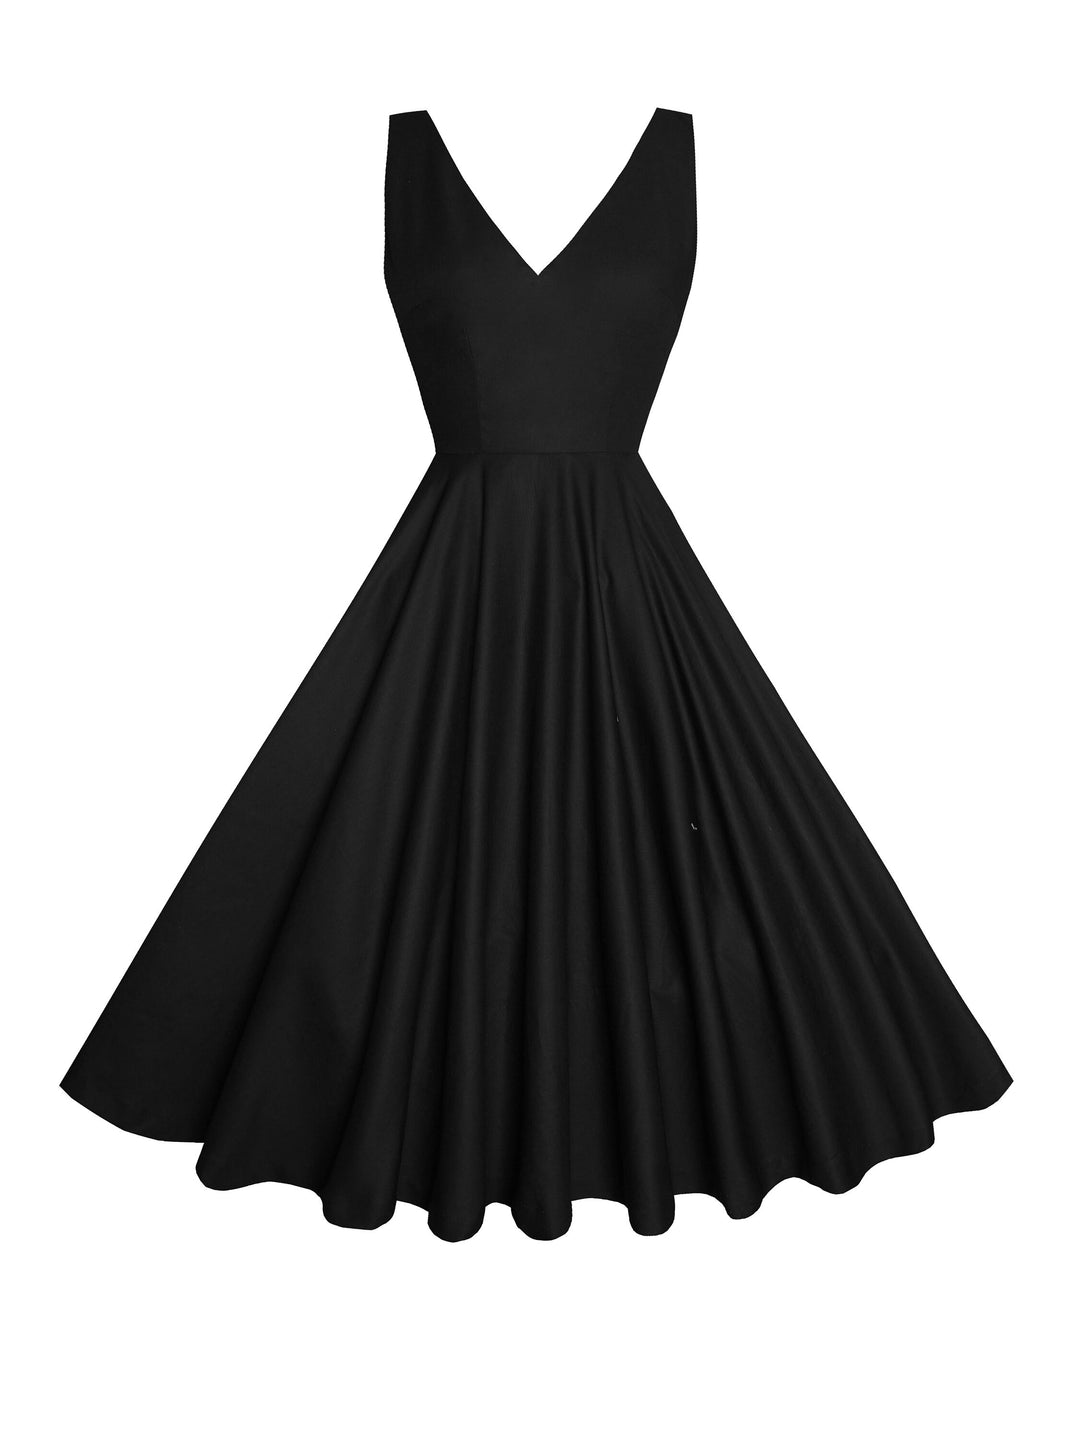 RTS - Size S - Diana Dress in Raven Black Cotton